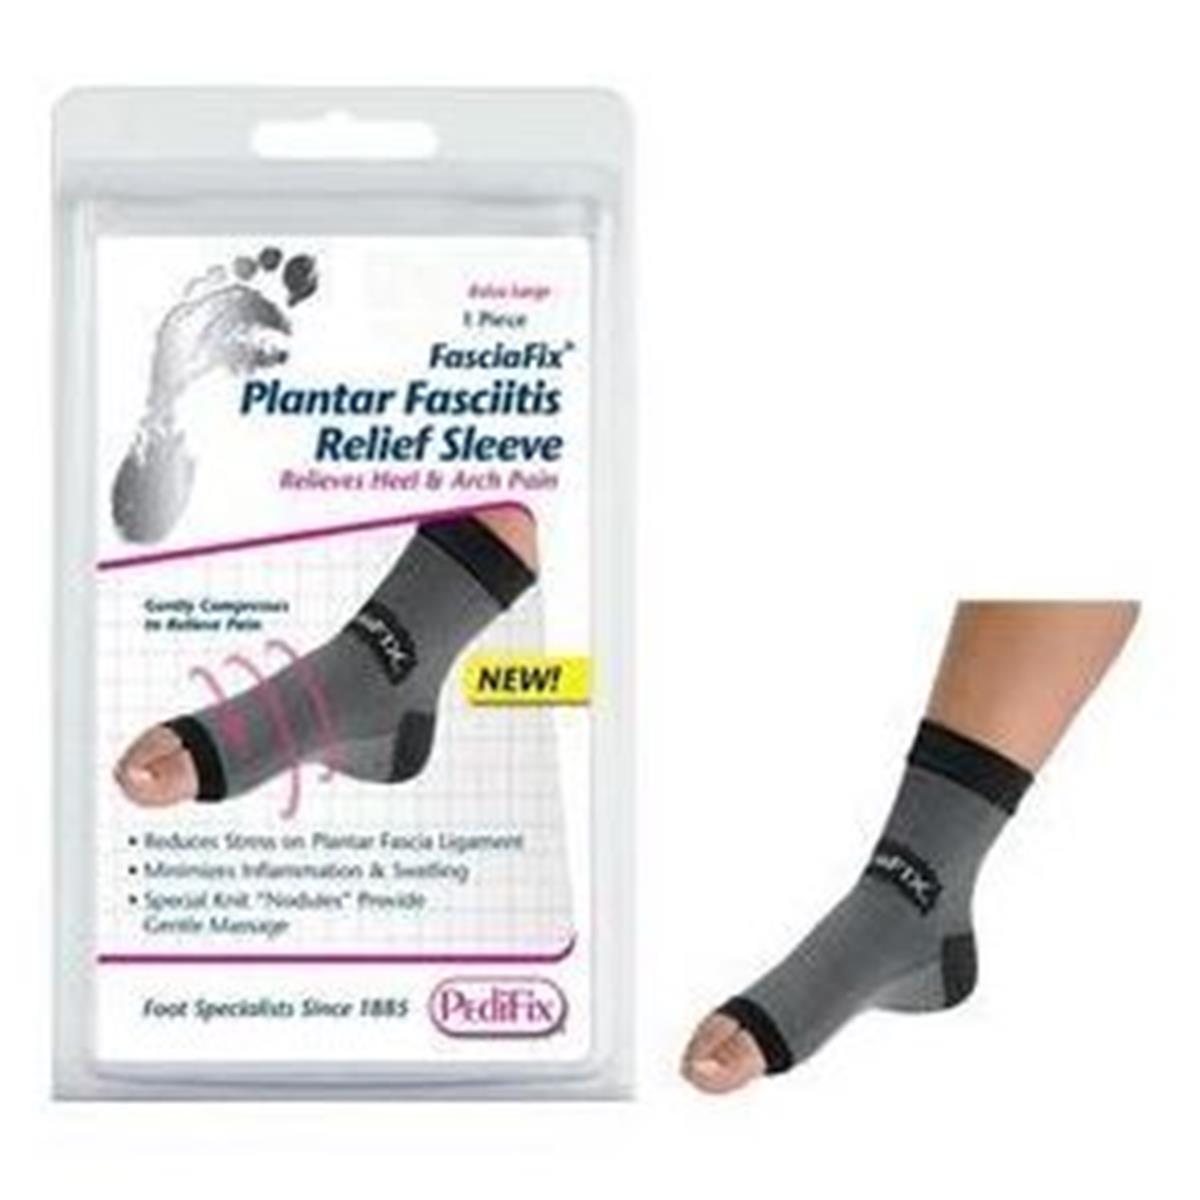 P6023xl Plantar Fasciitis Relief Sleeve - Extra Large